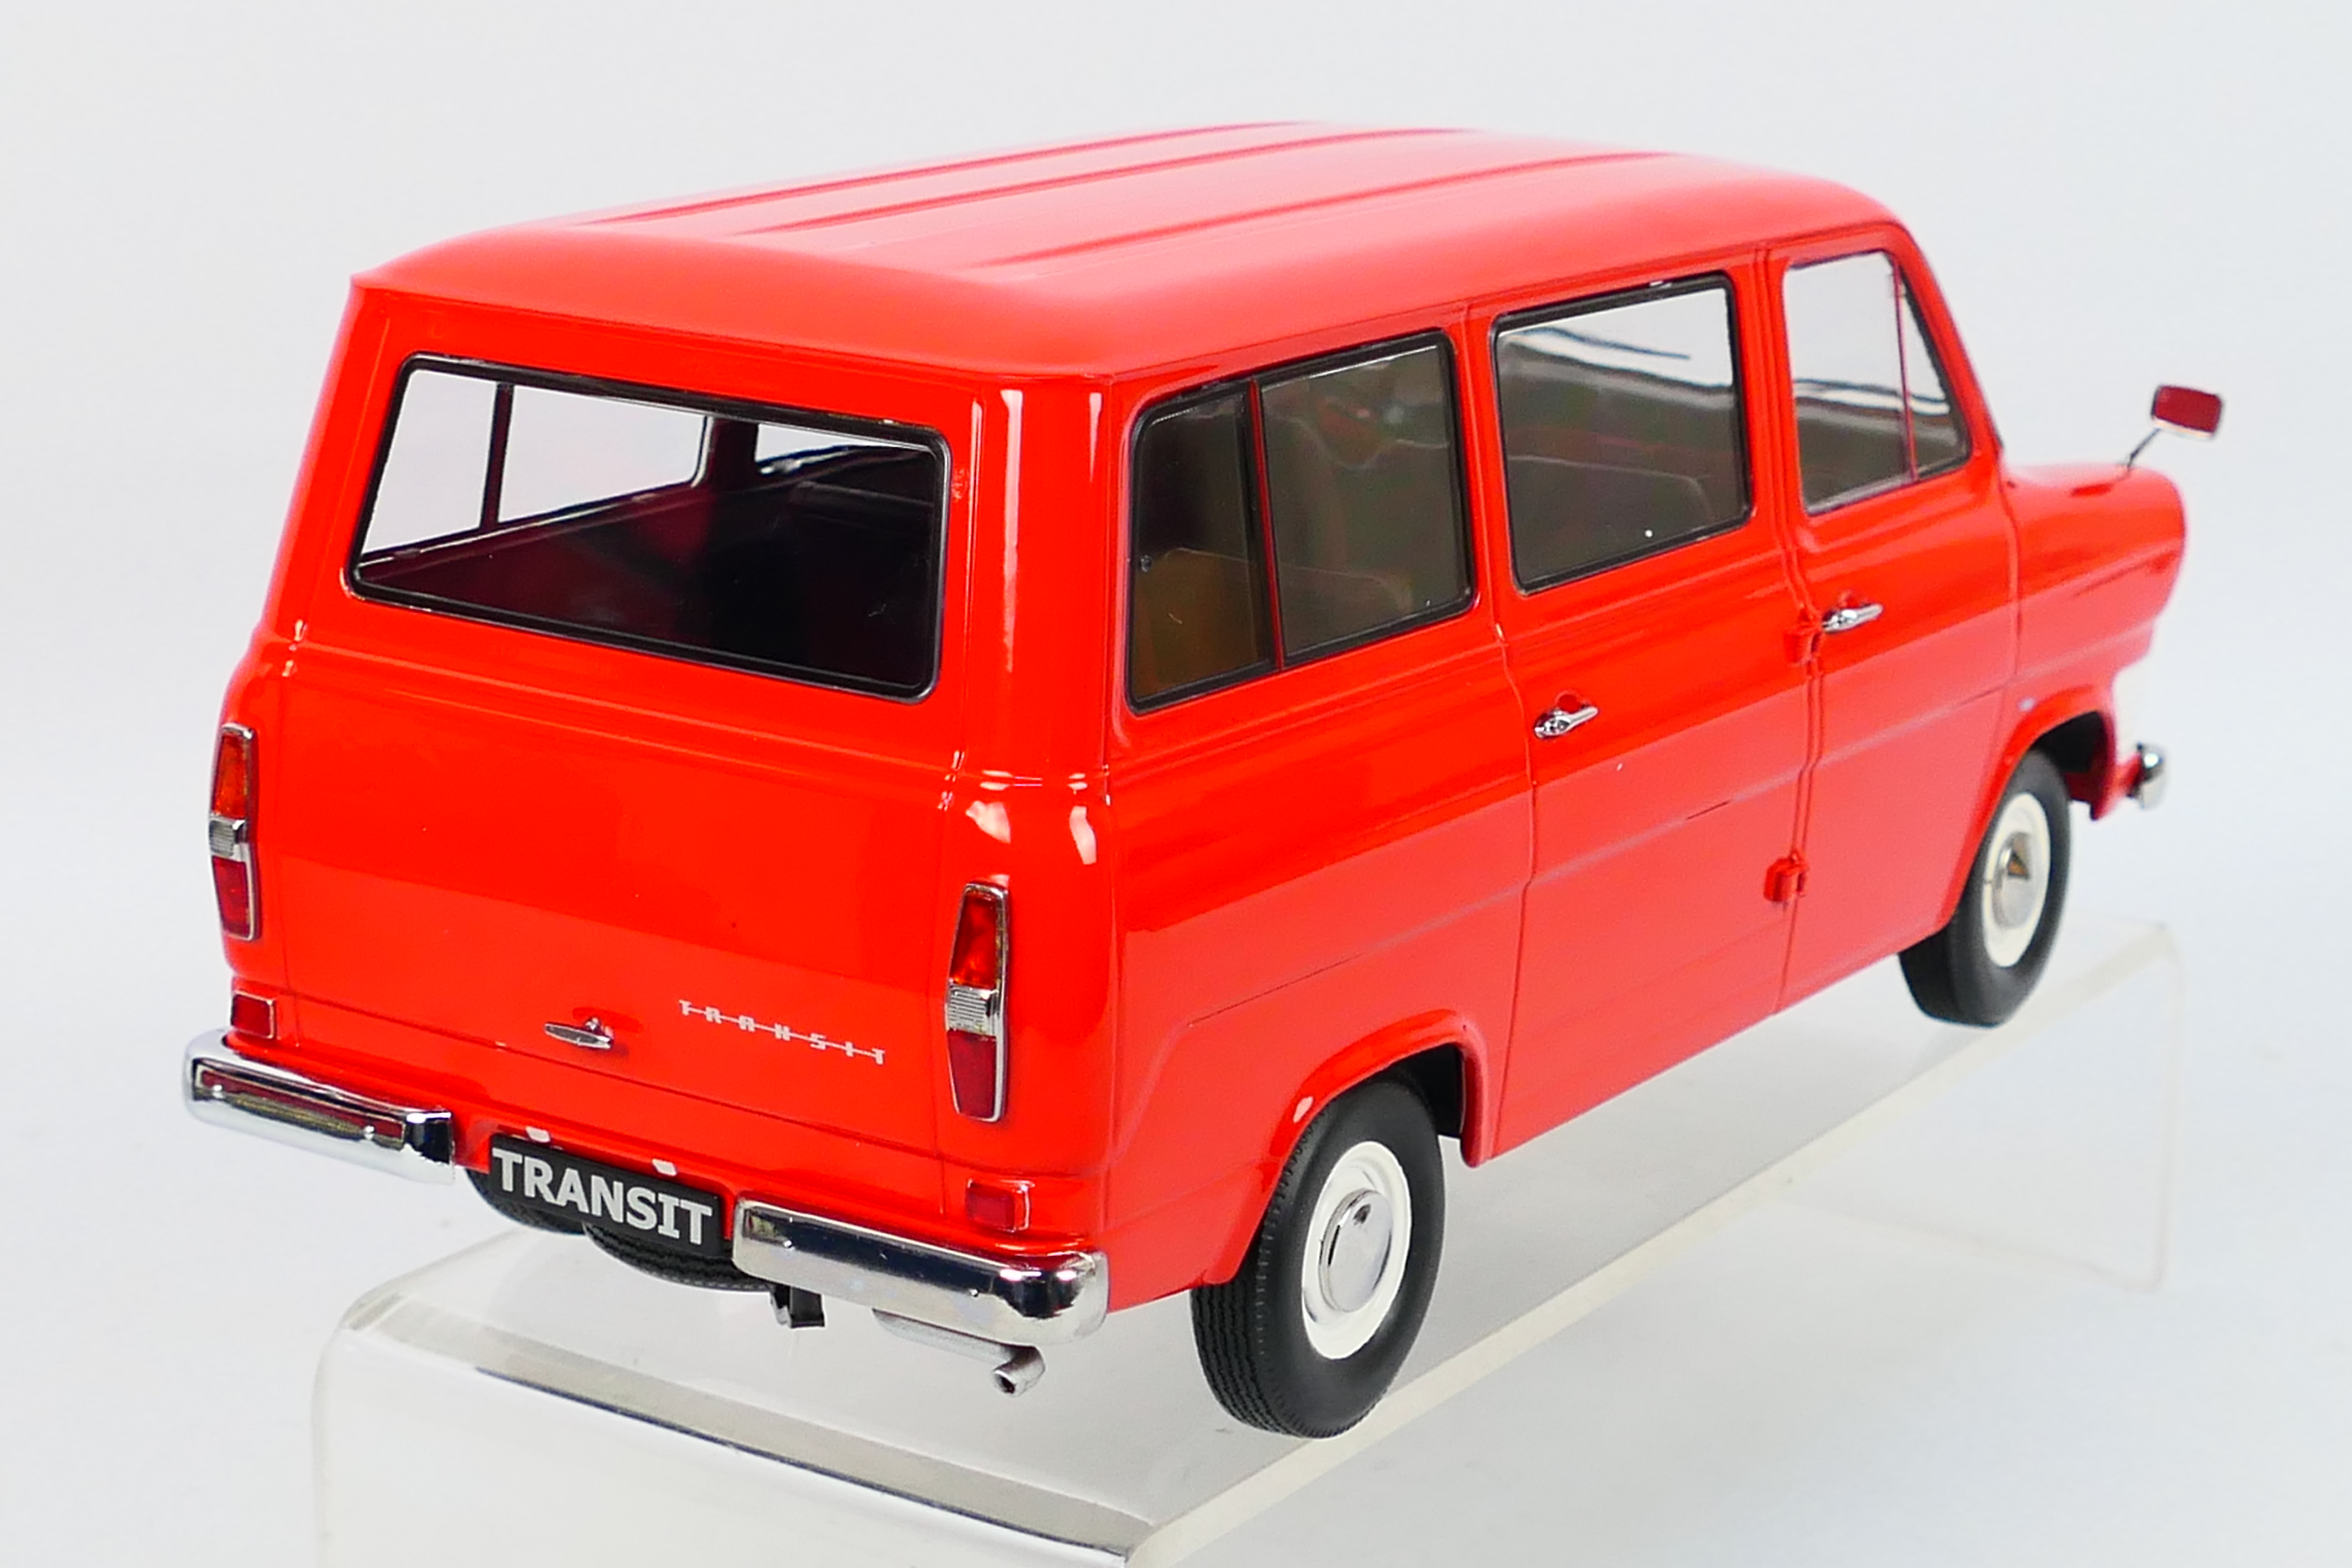 KK scale - A boxed Limited Edition 1:18 scale KK SCale #KKDC180463 1965 Ford Transit Bus. - Image 5 of 5